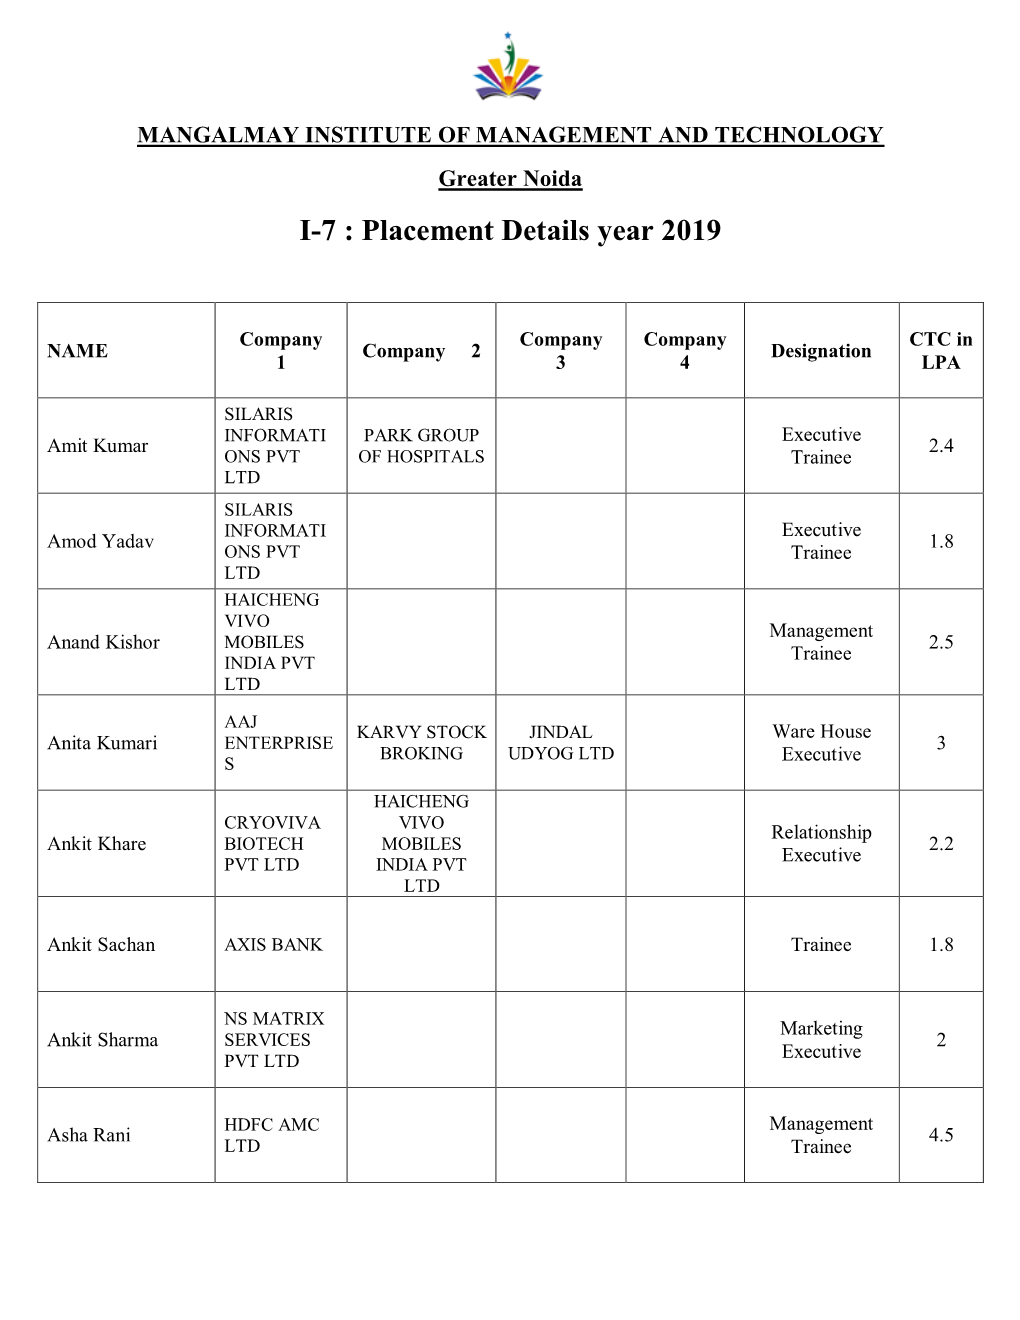 I-7 : Placement Details Year 2019